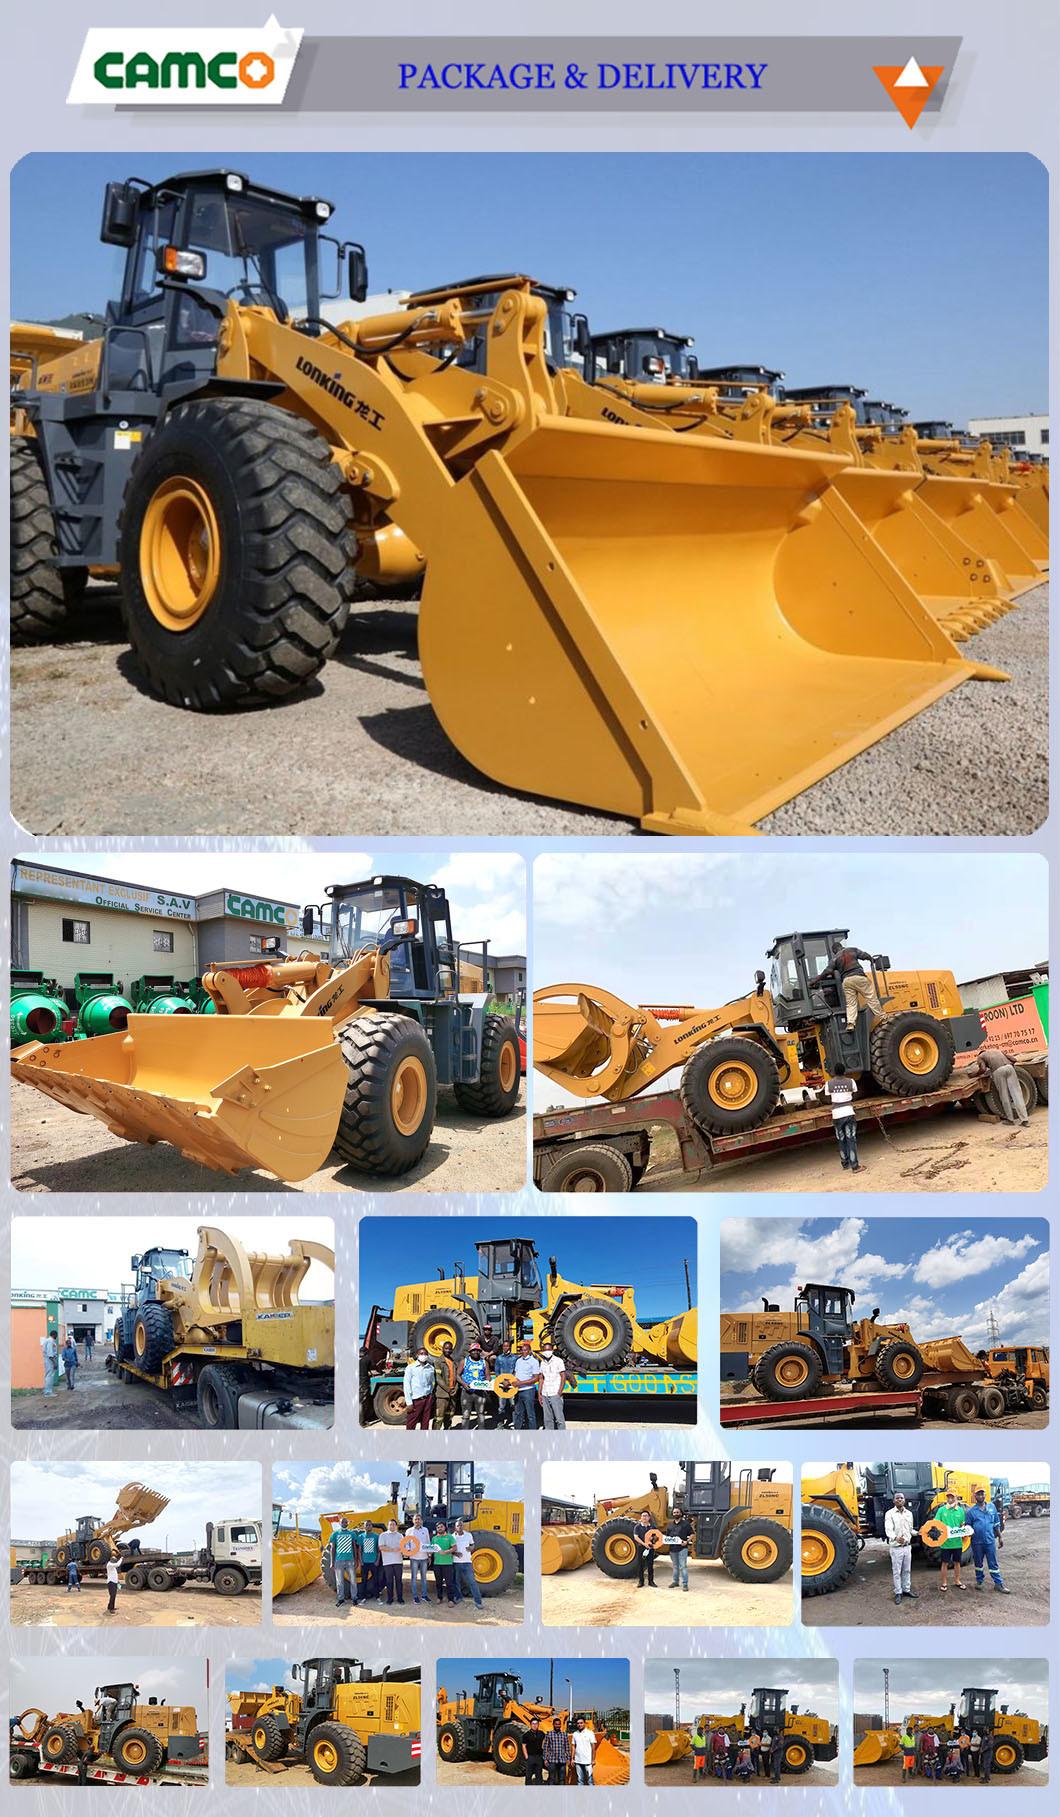 Lonking 5ton Manufacturer Heavy Construction Equipment 3ton 6ton Wheel Loading Machinery Shovel Loader Compact Articulated Front End Wheel Loader for Sale